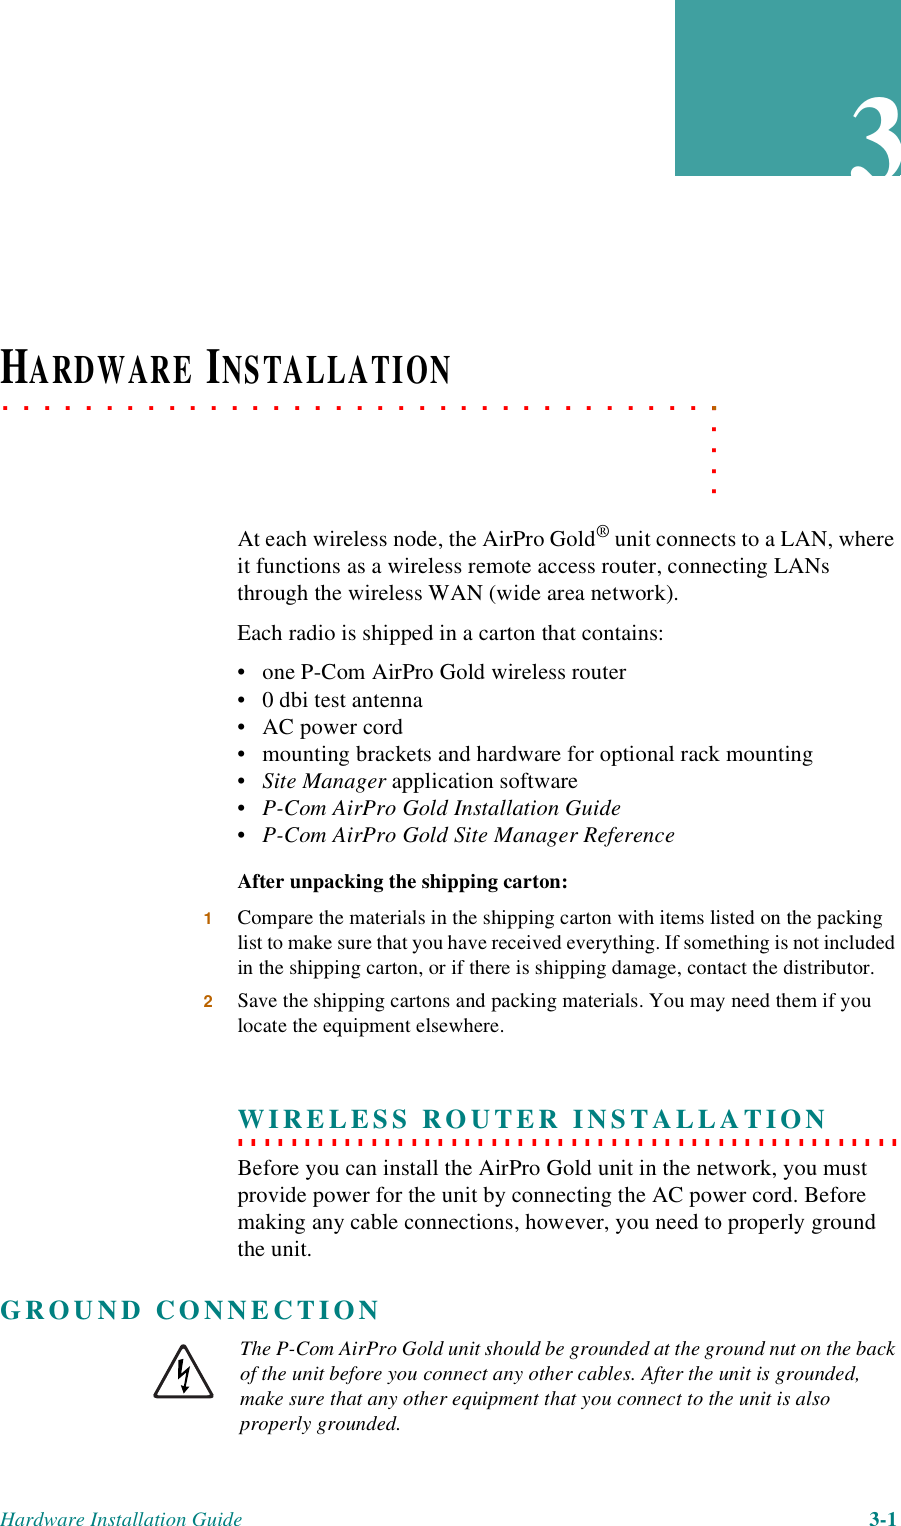 Hardware Installation Guide 3-13. . . . .. . . . . . . . . . . . . . . . . . . . . . . . . . . . . . . . . . .HARDWARE INSTALLATIONAt each wireless node, the AirPro Gold® unit connects to a LAN, where it functions as a wireless remote access router, connecting LANs through the wireless WAN (wide area network).Each radio is shipped in a carton that contains:• one P-Com AirPro Gold wireless router• 0 dbi test antenna• AC power cord• mounting brackets and hardware for optional rack mounting•Site Manager application software• P-Com AirPro Gold Installation Guide• P-Com AirPro Gold Site Manager ReferenceAfter unpacking the shipping carton:1Compare the materials in the shipping carton with items listed on the packing list to make sure that you have received everything. If something is not included in the shipping carton, or if there is shipping damage, contact the distributor.2Save the shipping cartons and packing materials. You may need them if you locate the equipment elsewhere.. . . . . . . . . . . . . . . . . . . . . . . . . . . . . . . . . . . . . . . . . . . . . . . . . . WIRELESS ROUTER INSTALLATIONBefore you can install the AirPro Gold unit in the network, you must provide power for the unit by connecting the AC power cord. Before making any cable connections, however, you need to properly ground the unit.GROUND CONNECTIONThe P-Com AirPro Gold unit should be grounded at the ground nut on the back of the unit before you connect any other cables. After the unit is grounded, make sure that any other equipment that you connect to the unit is also properly grounded.